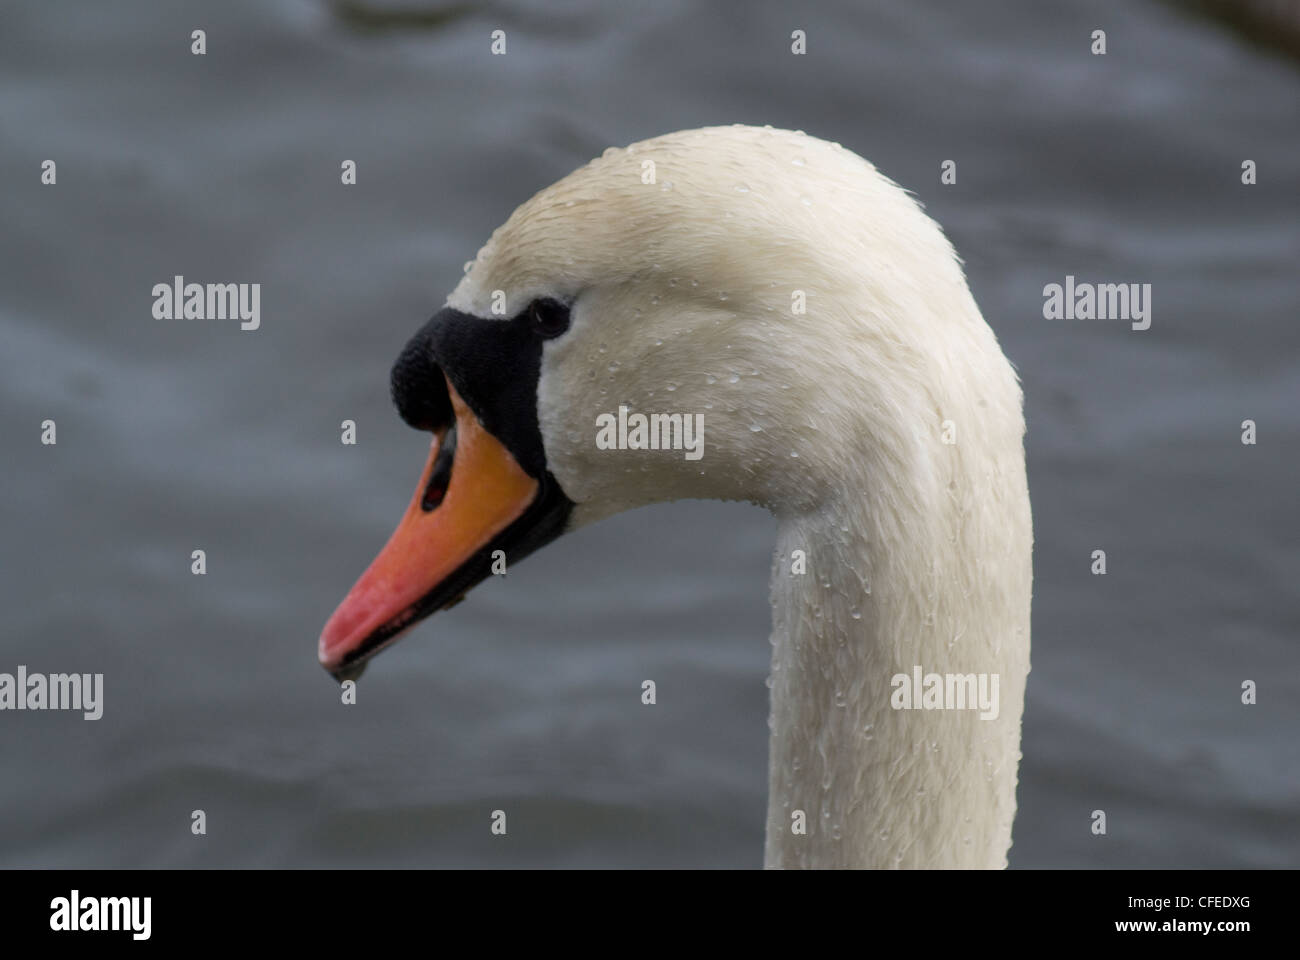 A Swan with wet plumage Stock Photo